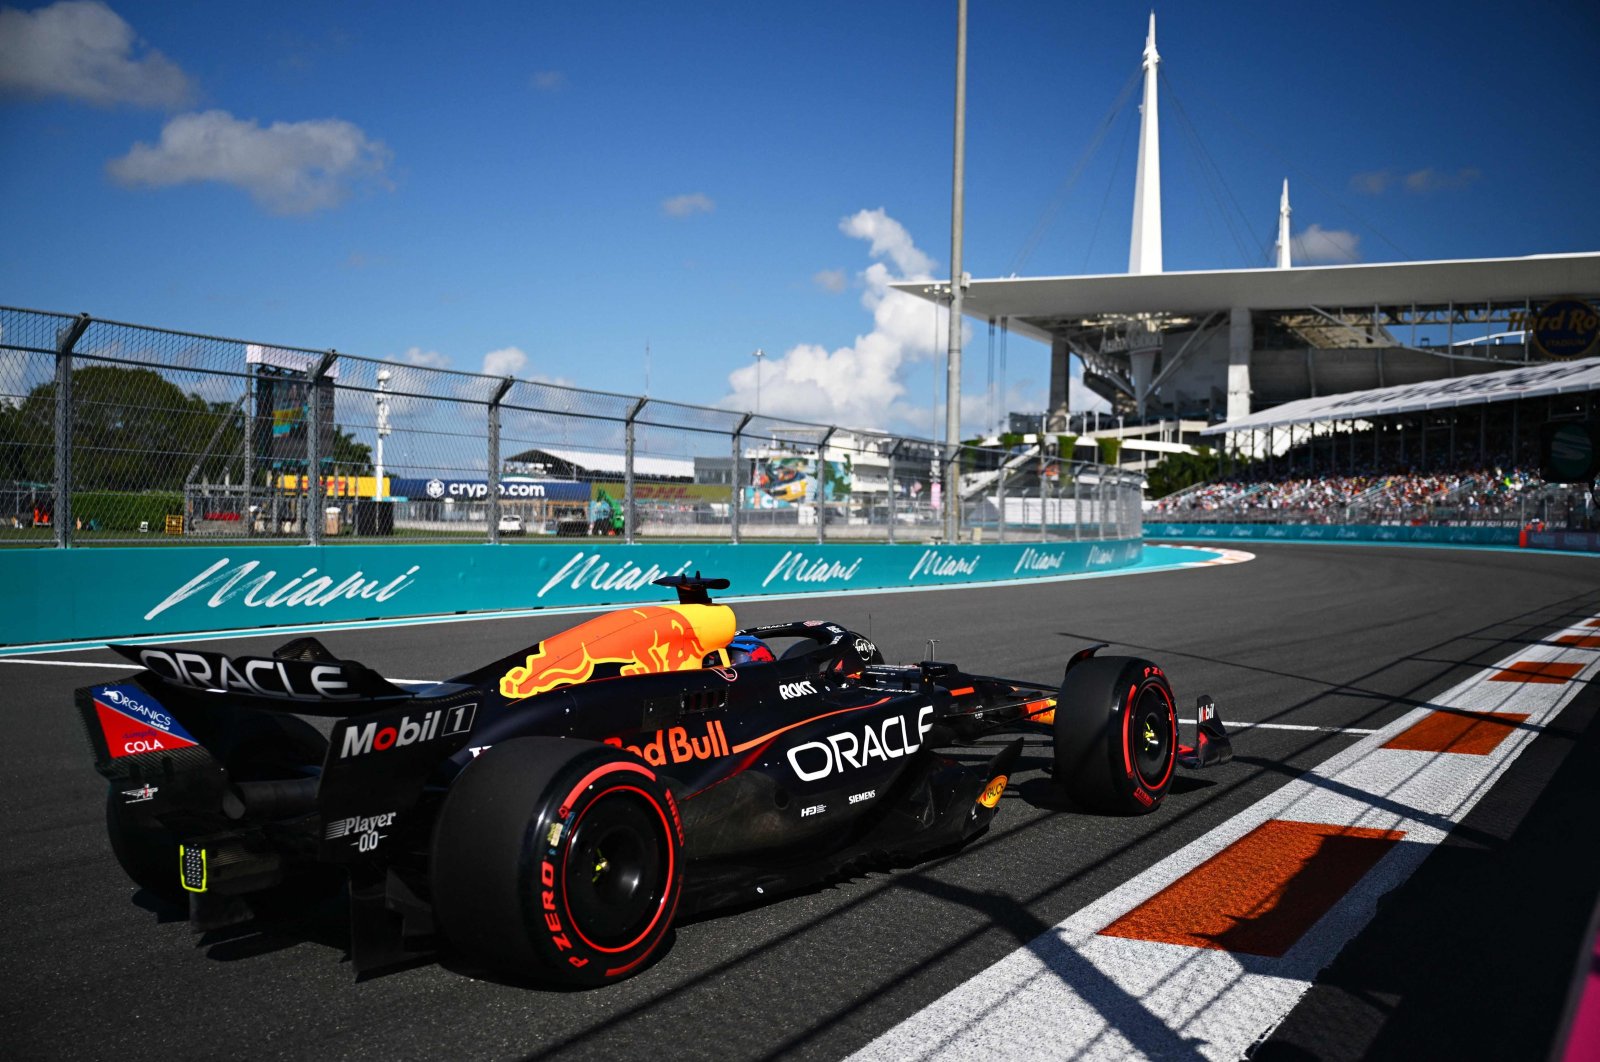 Verstappen pulls ahead in Miami GP, keeping pole position on fire